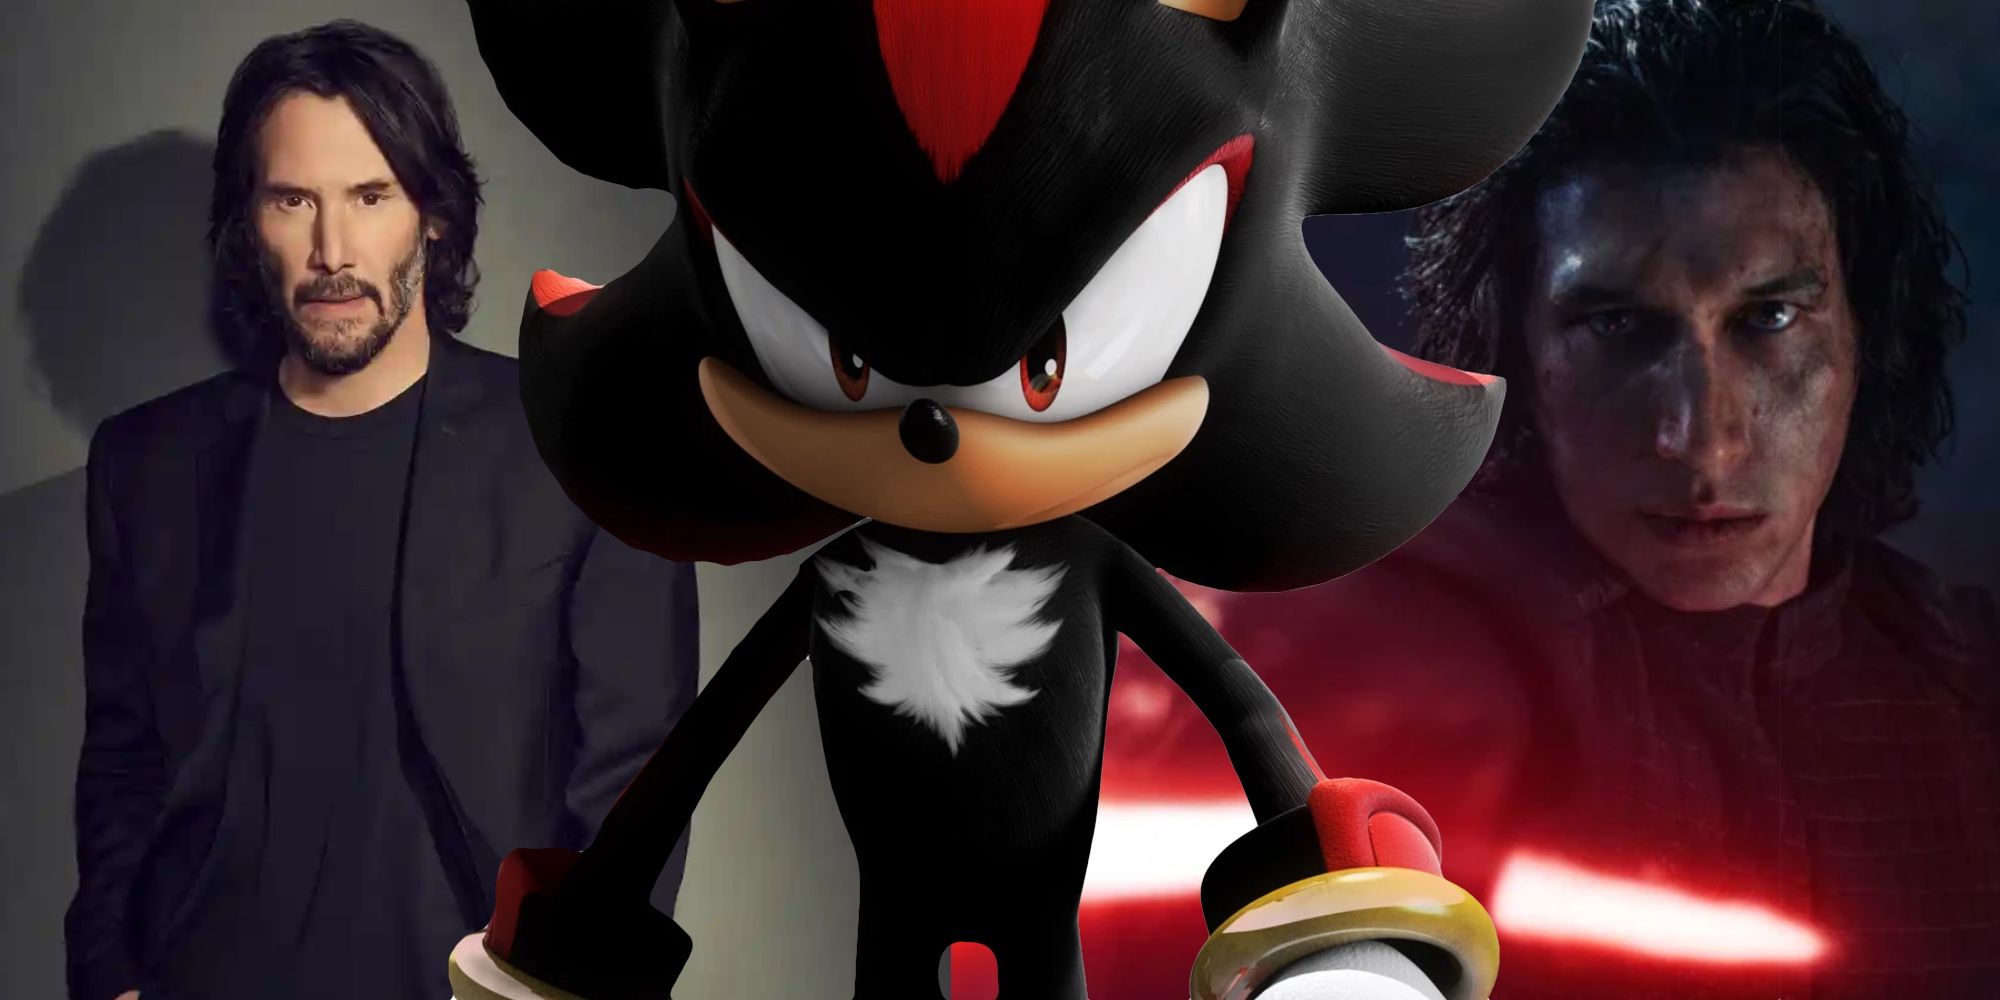 A blended image features Keanu Reeves and Adam Driver behind Shadow the Hedgehog